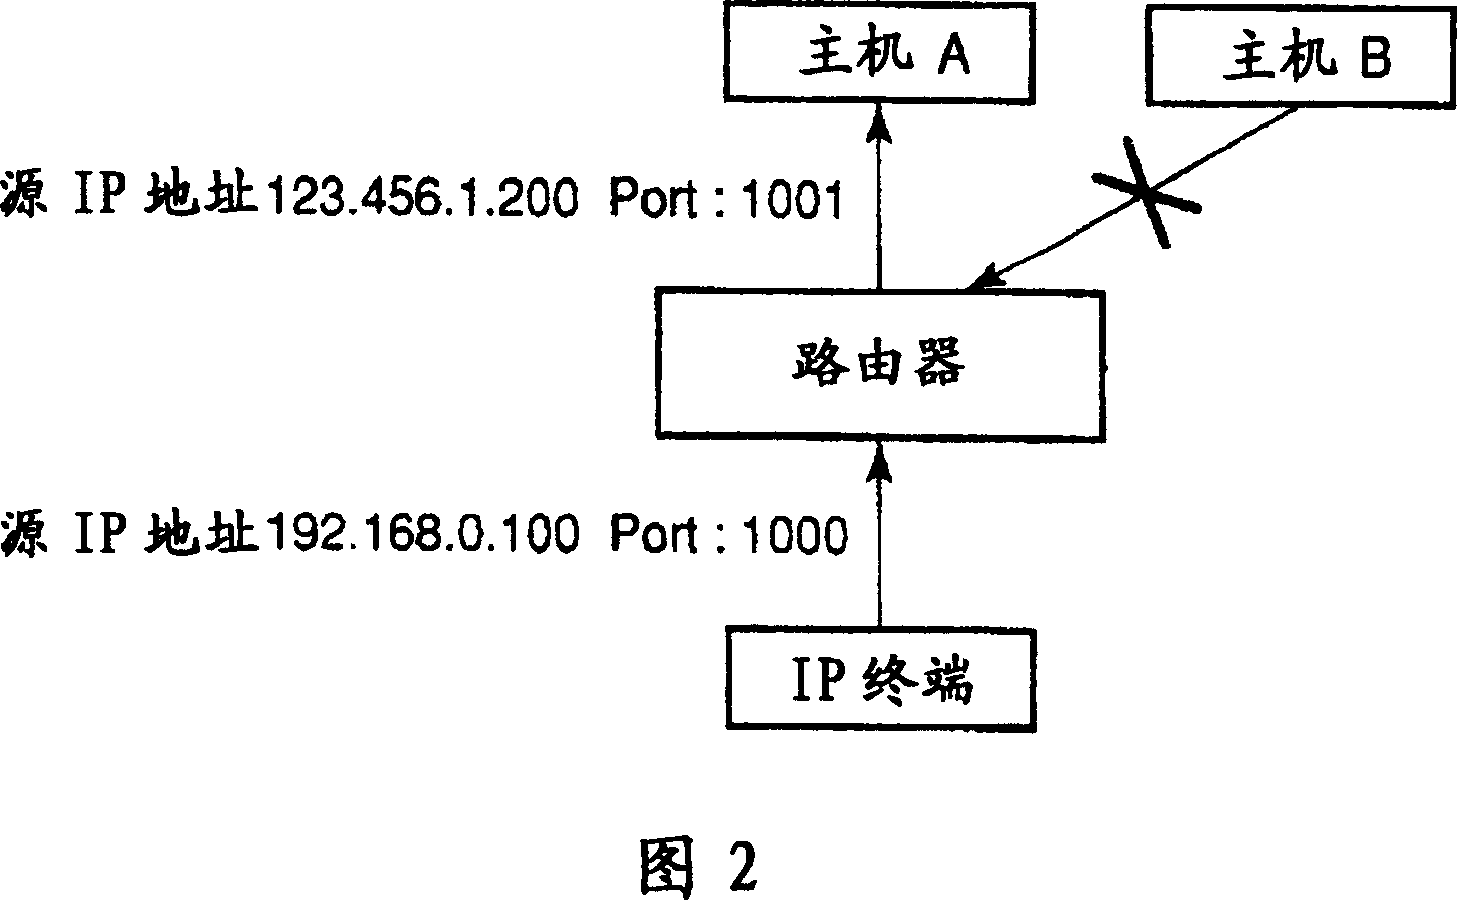 Sequential switching of relay servers according to server state